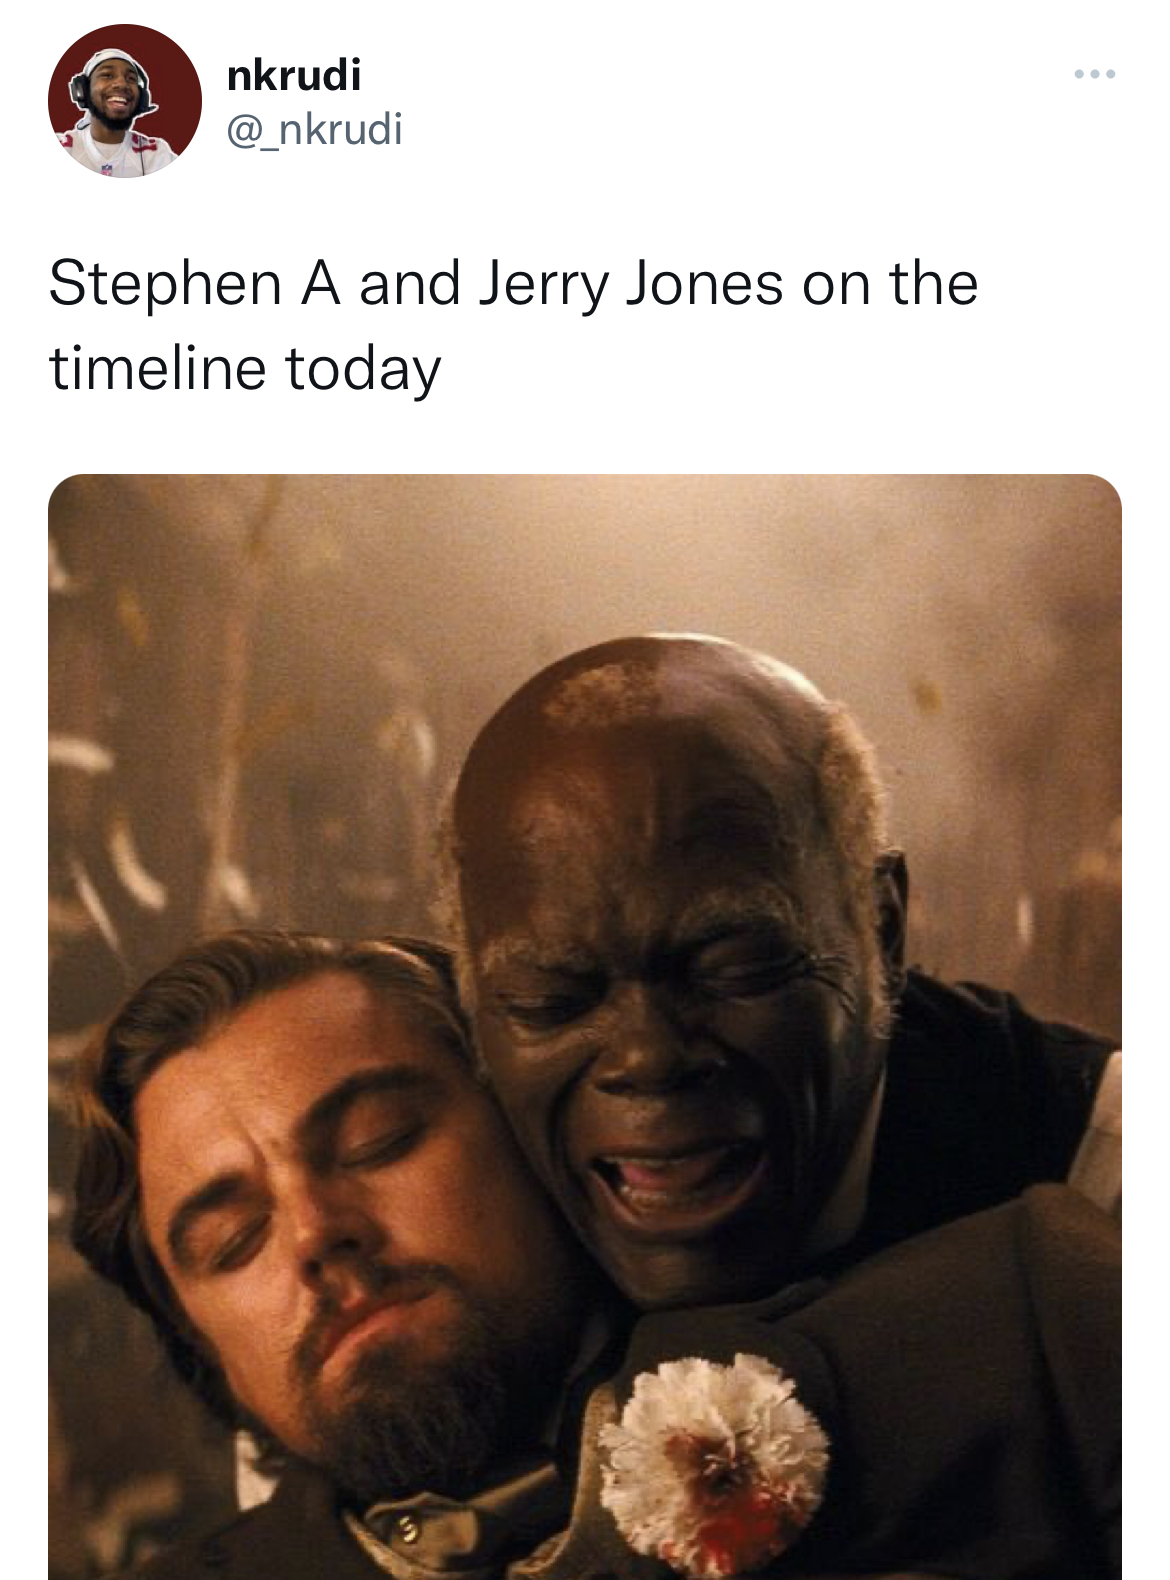 tweets roasting celebs - human - nkrudi Stephen A and Jerry Jones on the timeline today